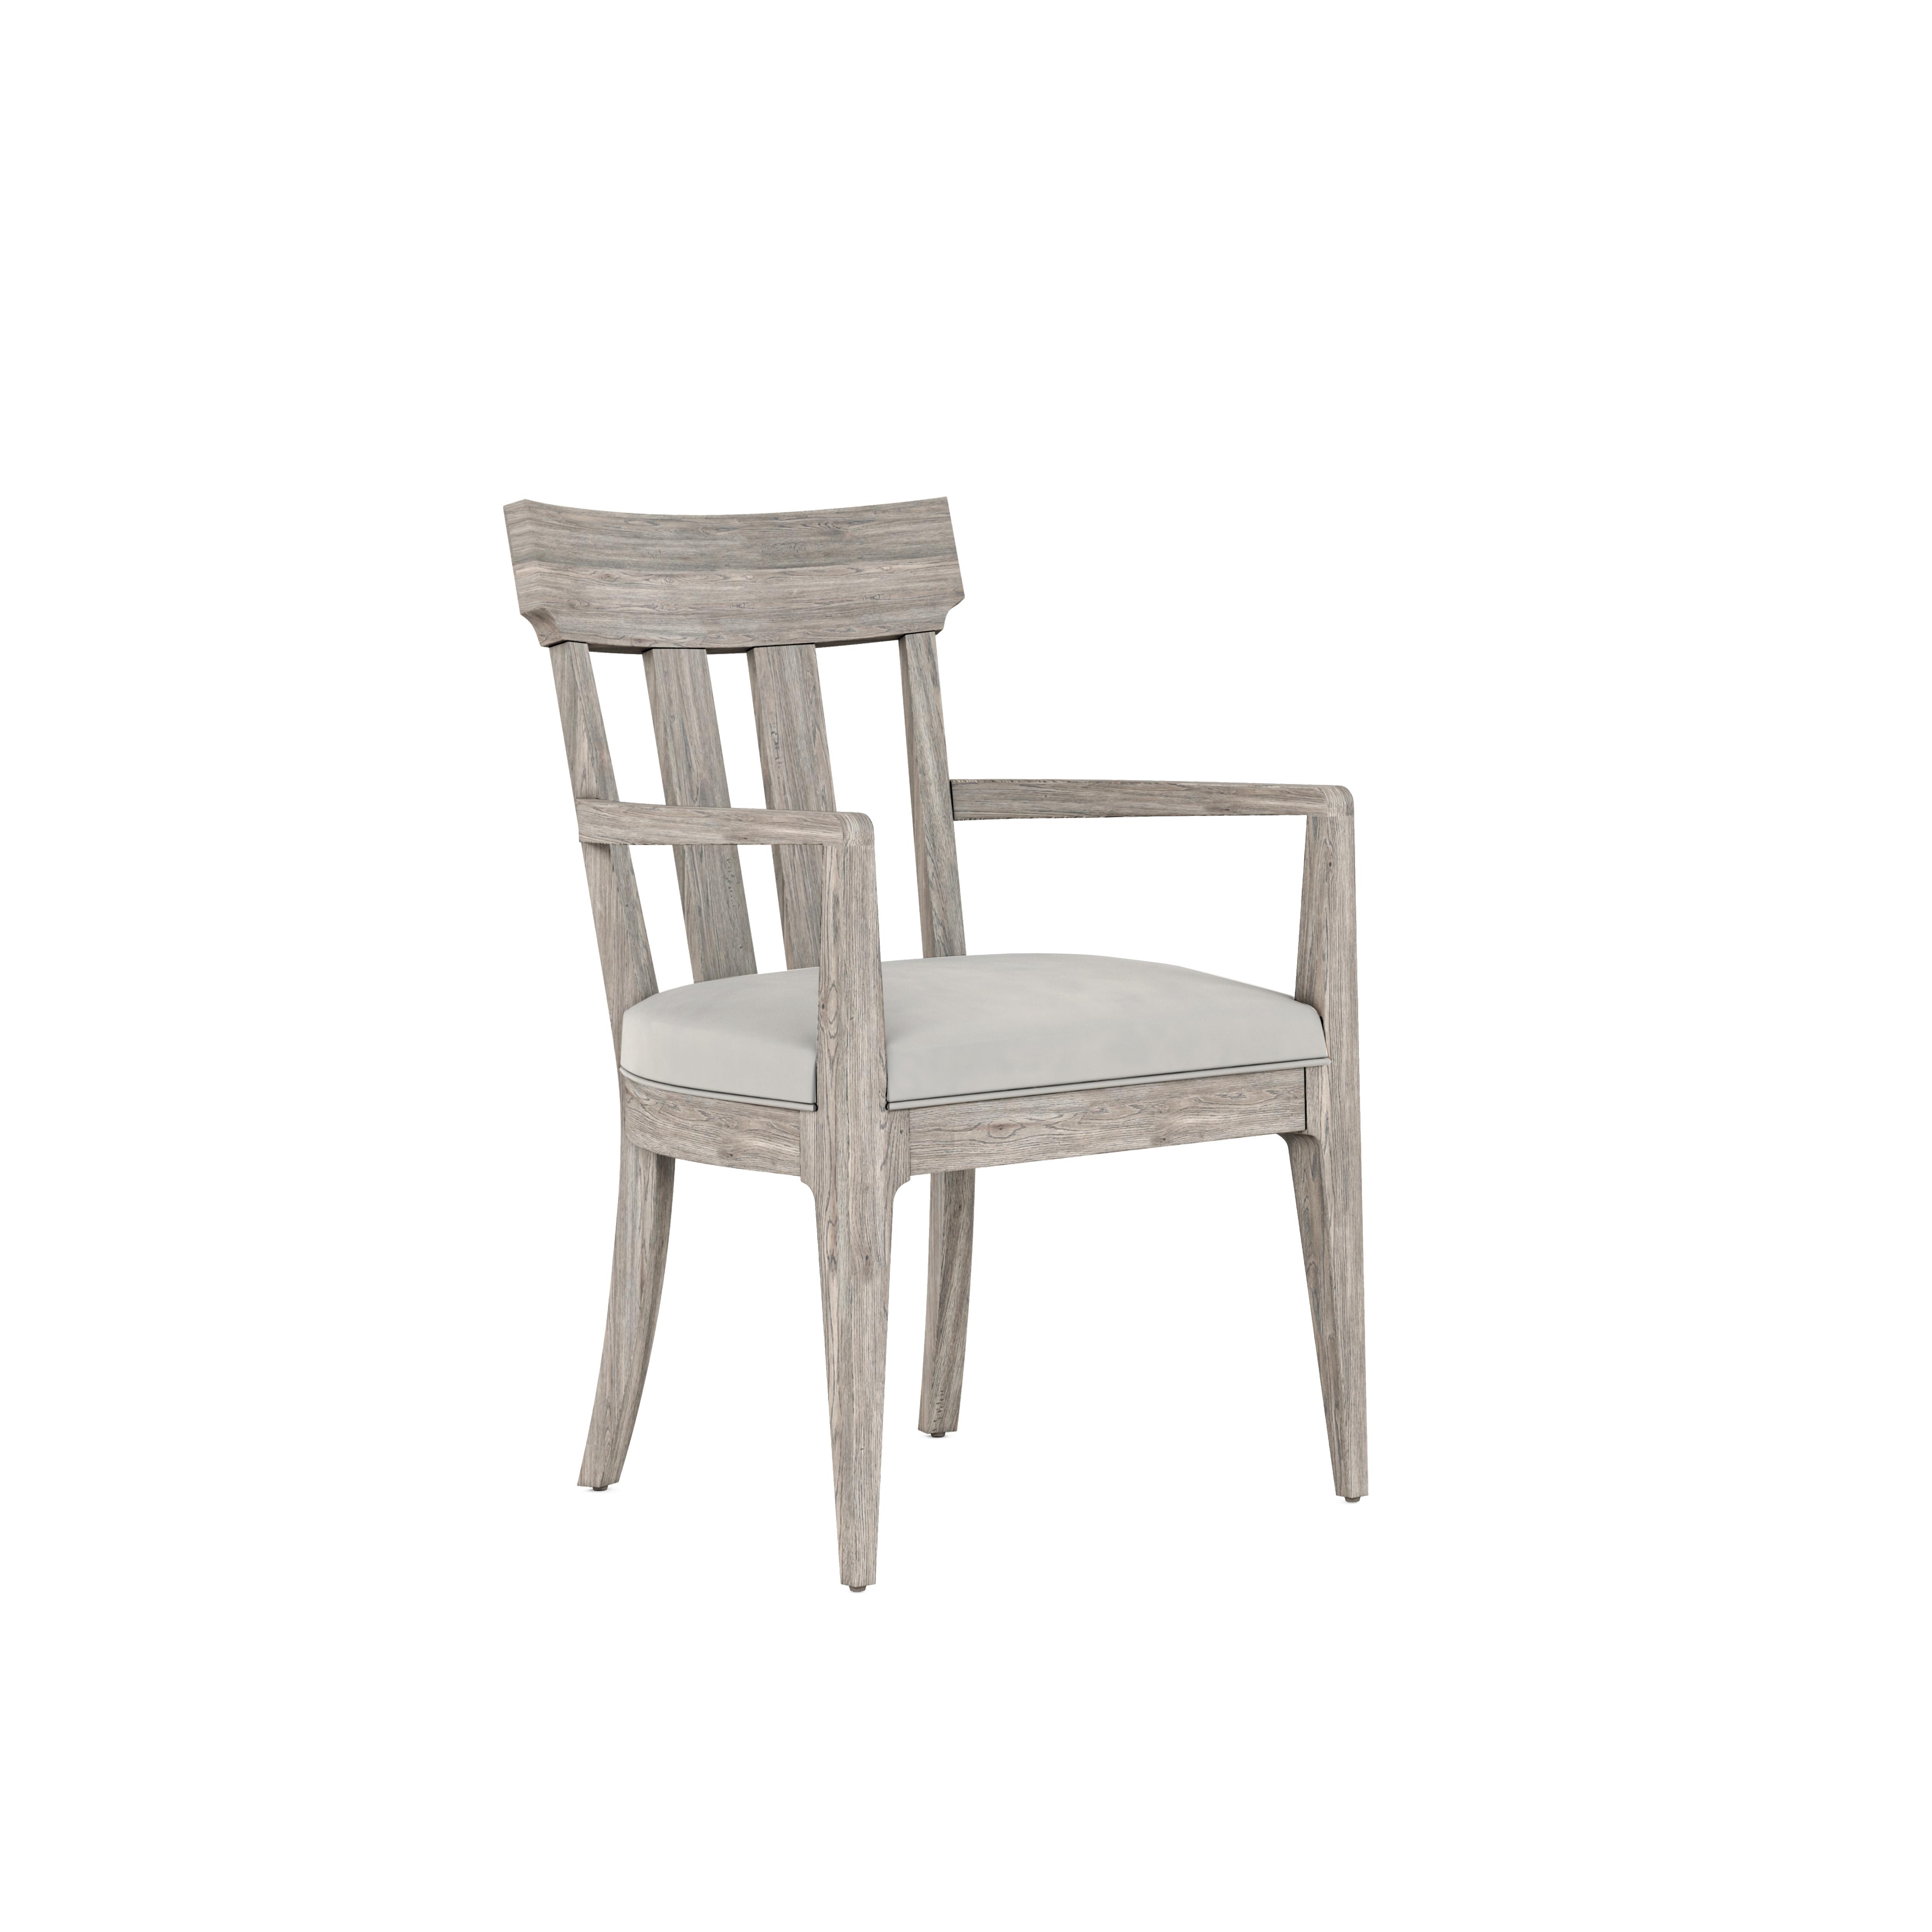 Traditional, Farmhouse Dining Chair Set Sojourn 316205-2311 in Beige Fabric